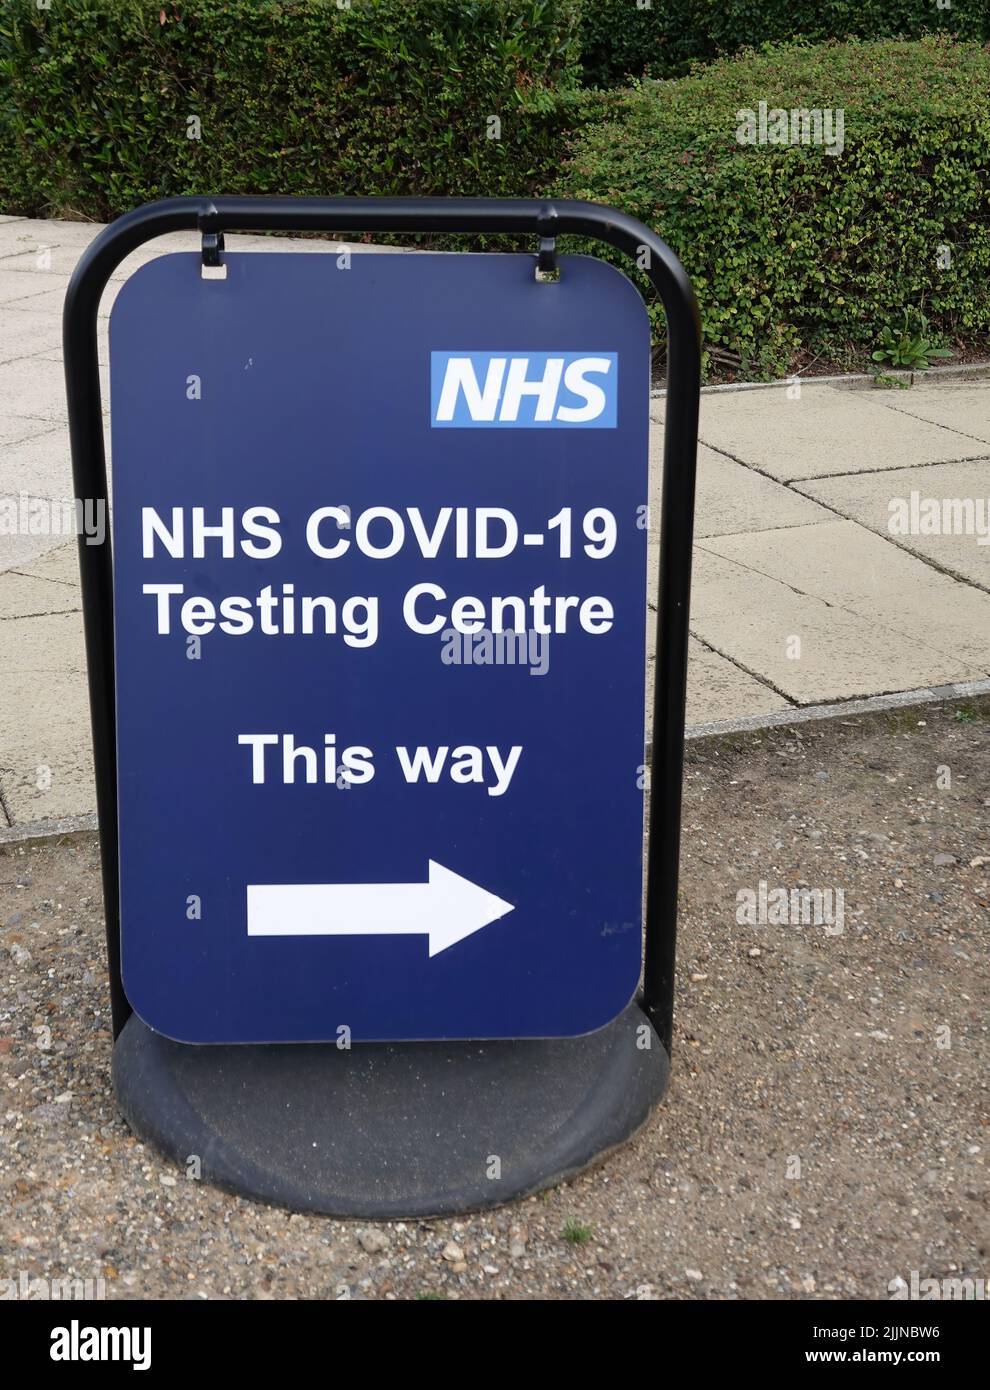 A direction sign pointing the way to the NHS Covid-19 Testing Centre, Anglia Ruskin University Stock Photo